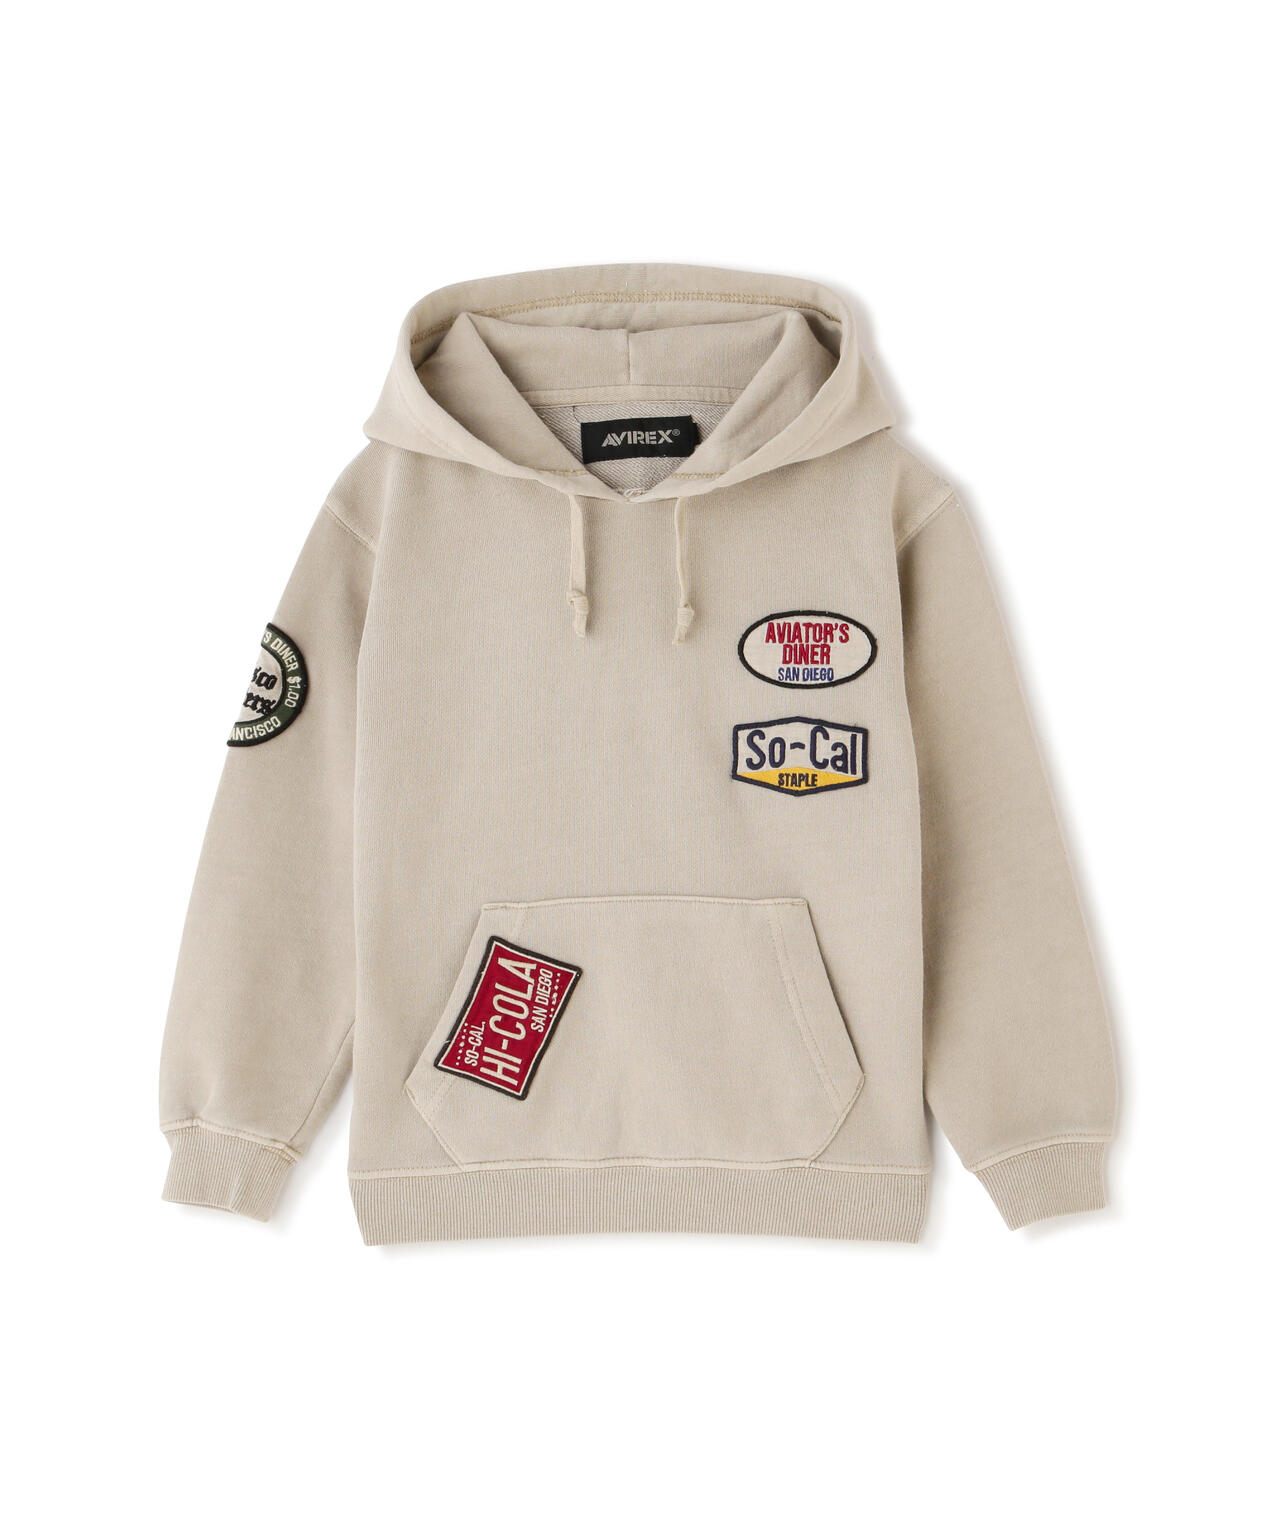 【KID'S/キッズ】LONG SLEEVE WEST COAST PULL OVER PARKA